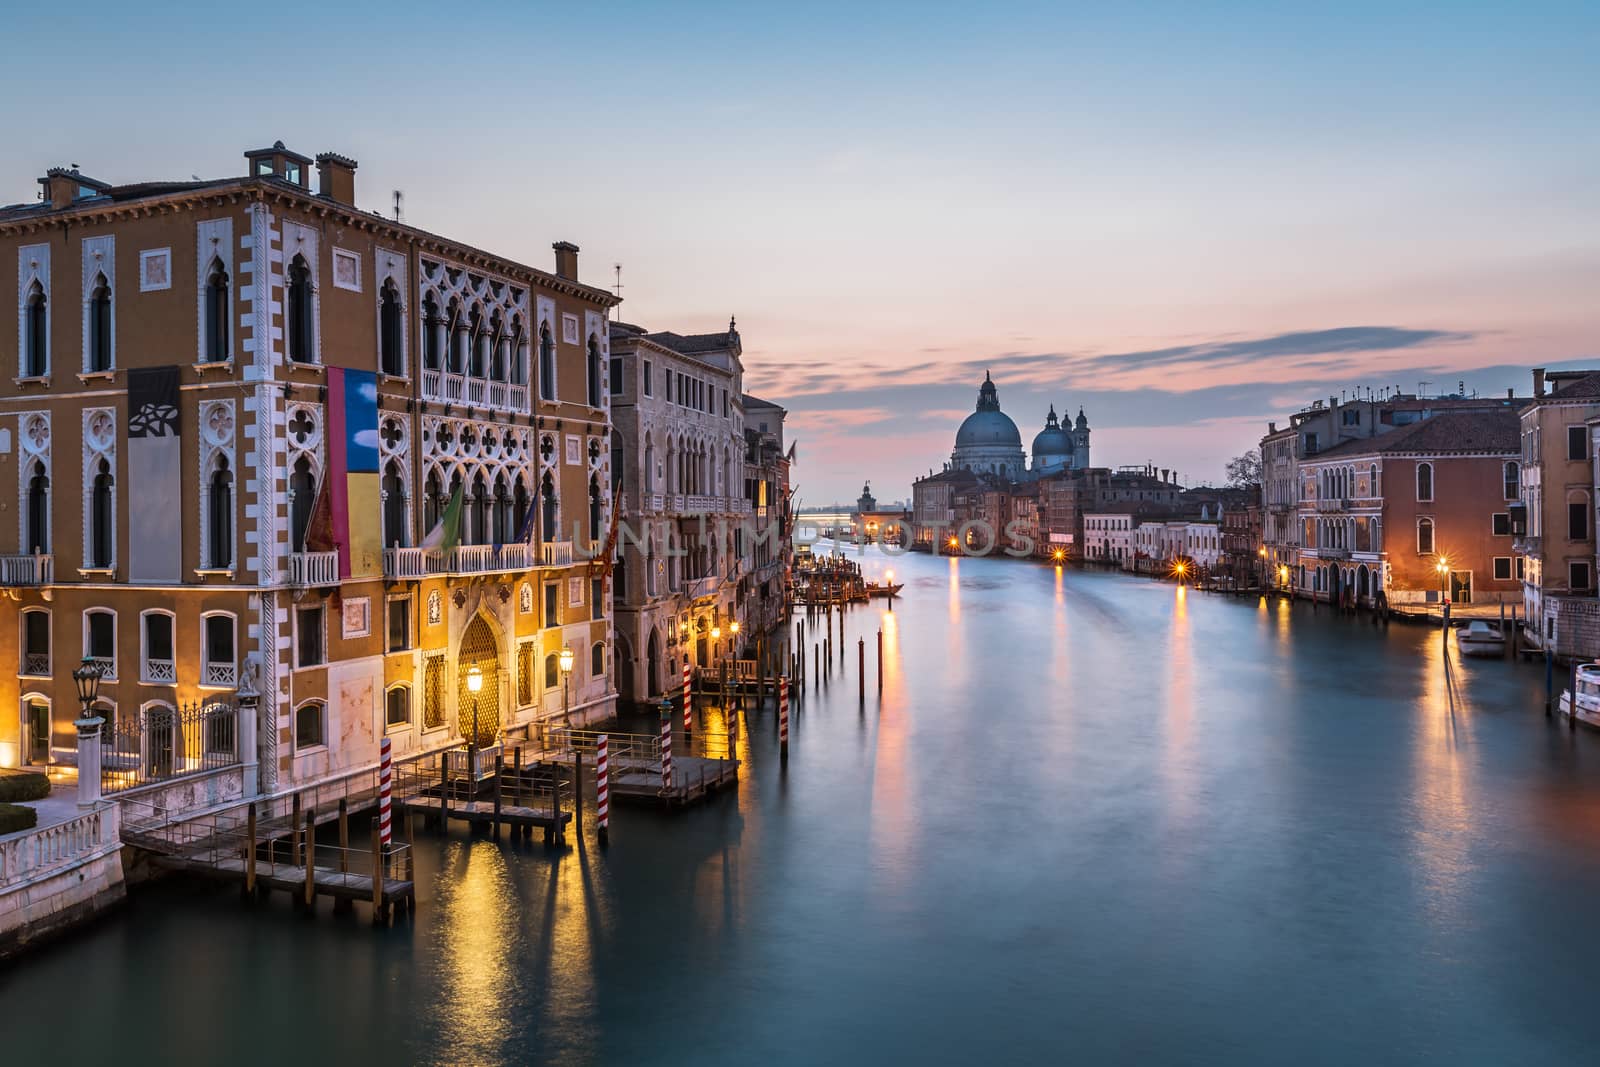 View on Grand Canal and Santa Maria della Salute Church from Acc by anshar